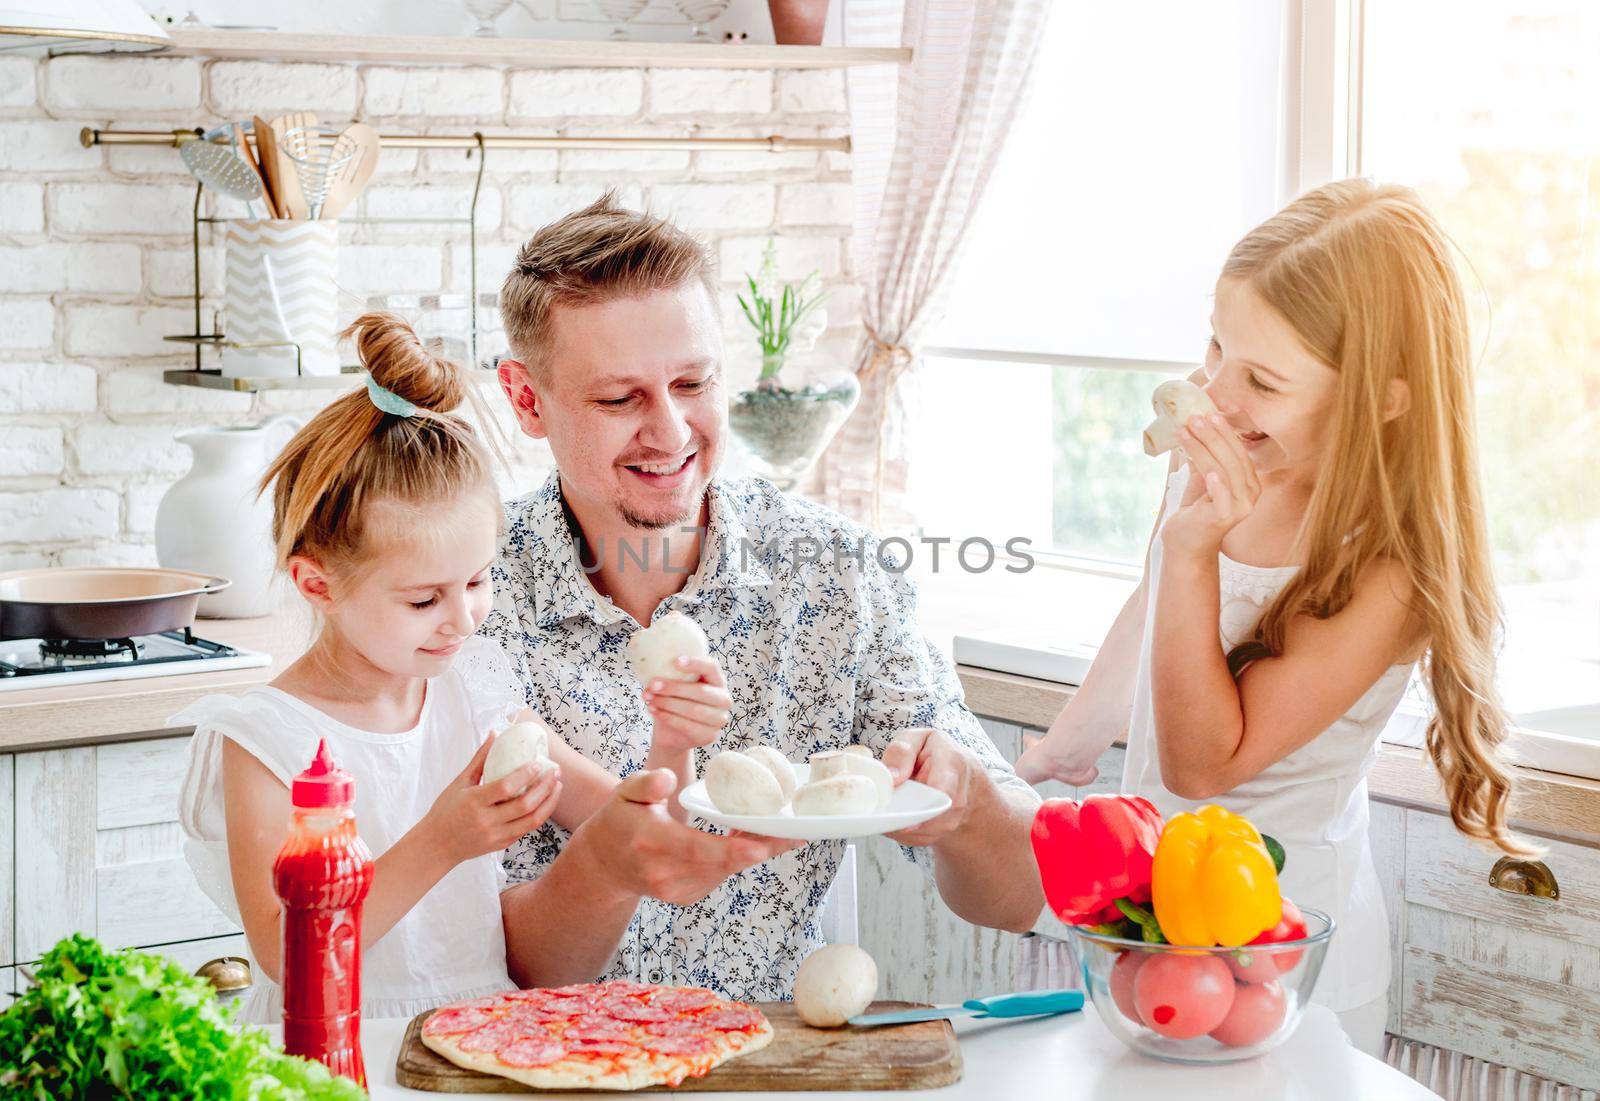 dad with daughters preparing pizza by tan4ikk1